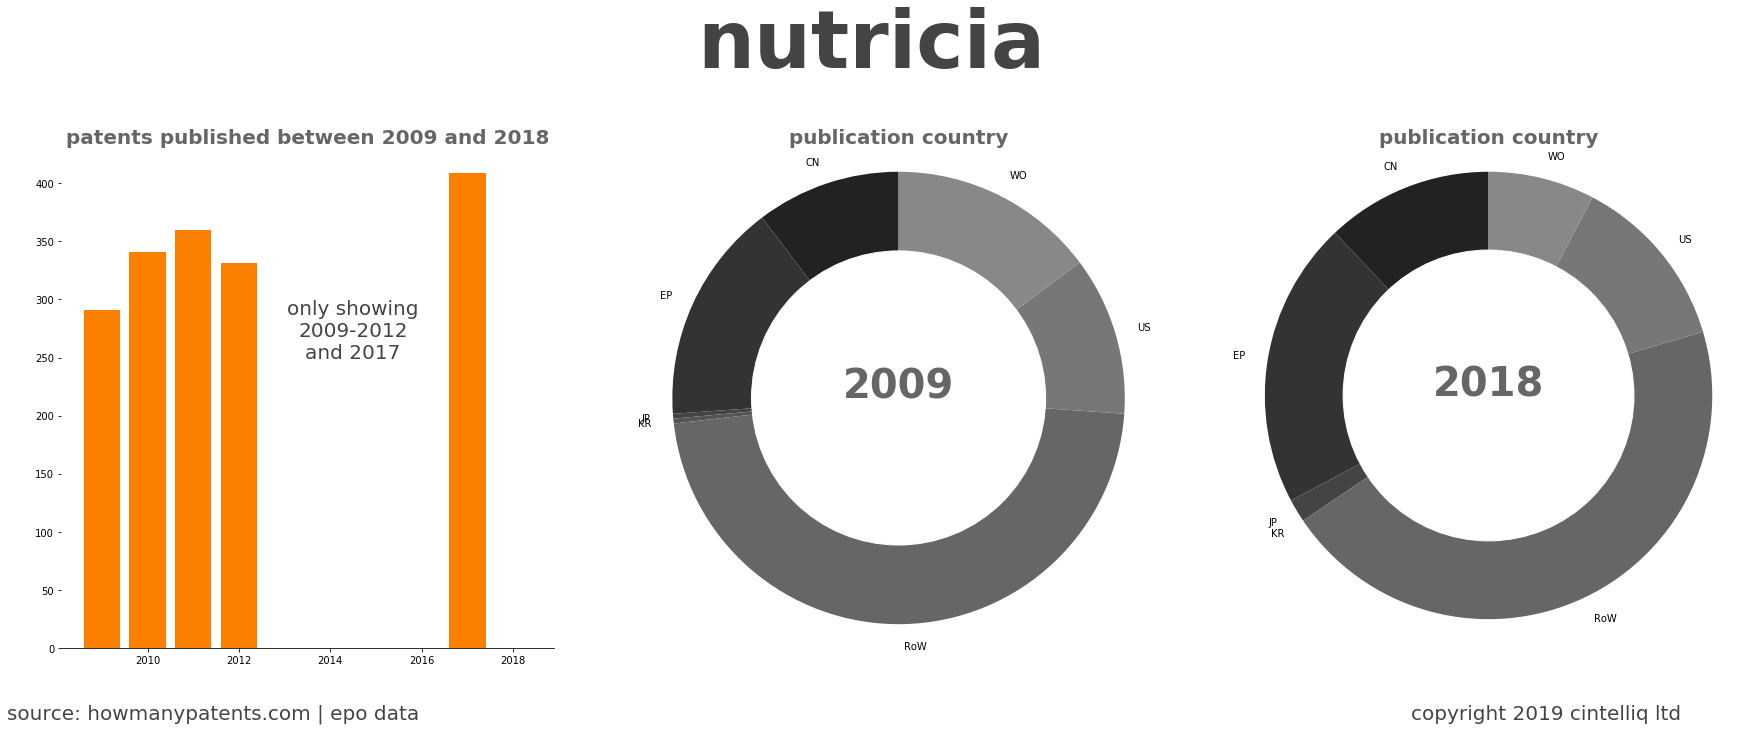 summary of patents for Nutricia